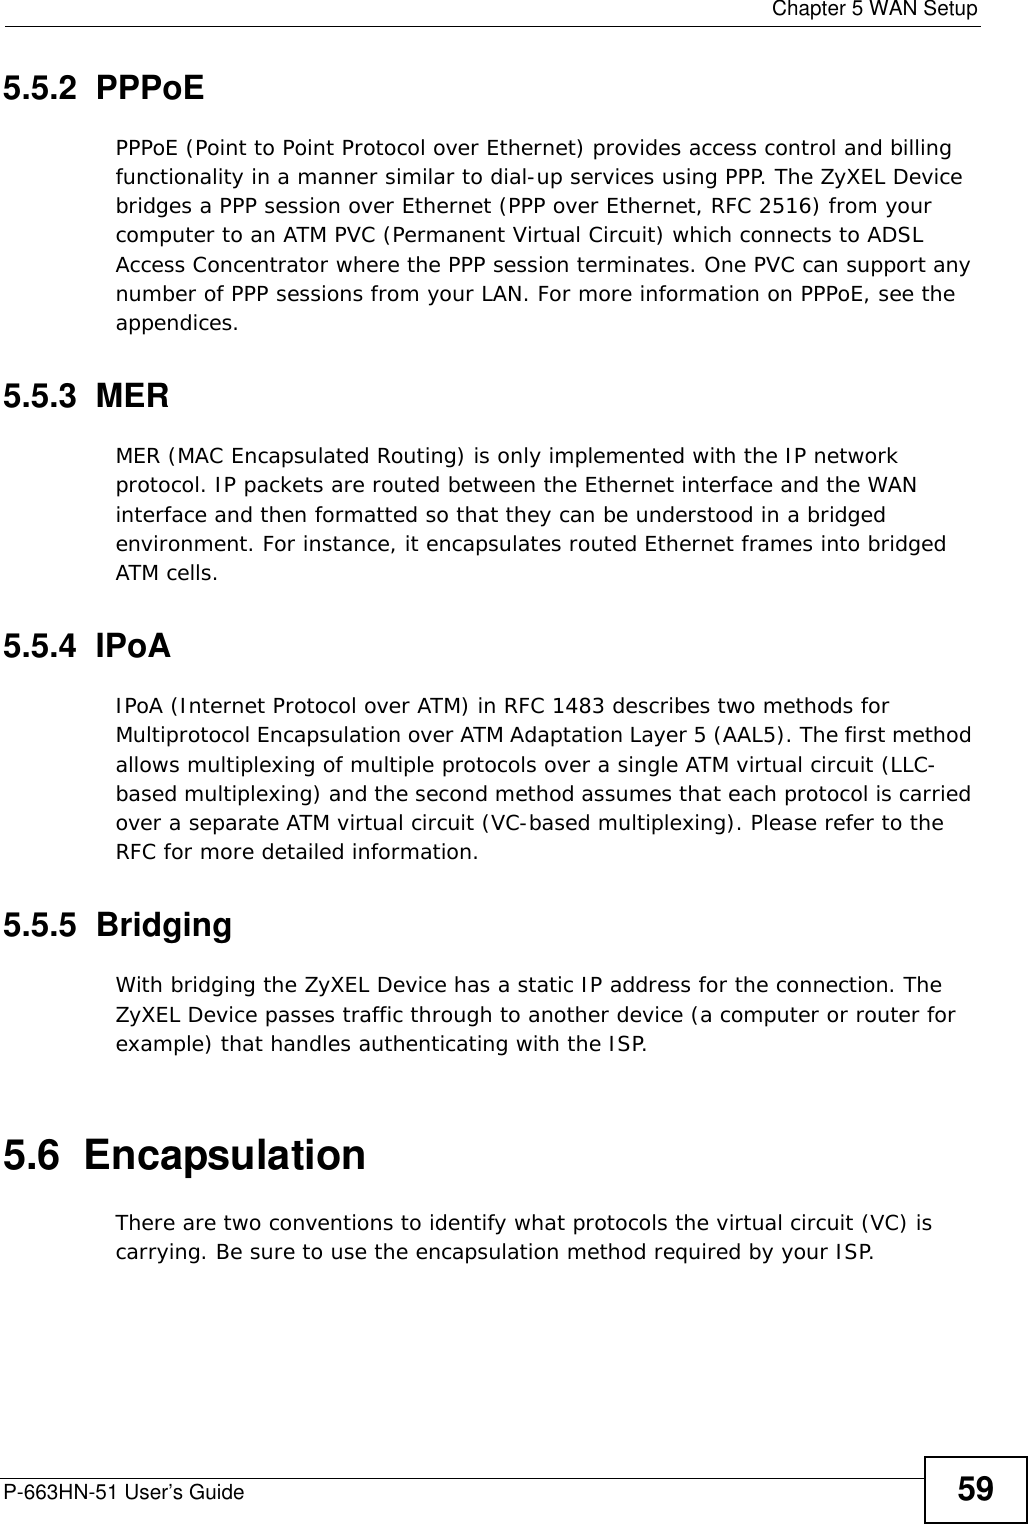  Chapter 5 WAN SetupP-663HN-51 User’s Guide 595.5.2  PPPoEPPPoE (Point to Point Protocol over Ethernet) provides access control and billing functionality in a manner similar to dial-up services using PPP. The ZyXEL Device bridges a PPP session over Ethernet (PPP over Ethernet, RFC 2516) from your computer to an ATM PVC (Permanent Virtual Circuit) which connects to ADSL Access Concentrator where the PPP session terminates. One PVC can support any number of PPP sessions from your LAN. For more information on PPPoE, see the appendices.5.5.3  MERMER (MAC Encapsulated Routing) is only implemented with the IP network protocol. IP packets are routed between the Ethernet interface and the WAN interface and then formatted so that they can be understood in a bridged environment. For instance, it encapsulates routed Ethernet frames into bridged ATM cells. 5.5.4  IPoAIPoA (Internet Protocol over ATM) in RFC 1483 describes two methods for Multiprotocol Encapsulation over ATM Adaptation Layer 5 (AAL5). The first method allows multiplexing of multiple protocols over a single ATM virtual circuit (LLC-based multiplexing) and the second method assumes that each protocol is carried over a separate ATM virtual circuit (VC-based multiplexing). Please refer to the RFC for more detailed information.5.5.5  BridgingWith bridging the ZyXEL Device has a static IP address for the connection. The ZyXEL Device passes traffic through to another device (a computer or router for example) that handles authenticating with the ISP.5.6  EncapsulationThere are two conventions to identify what protocols the virtual circuit (VC) is carrying. Be sure to use the encapsulation method required by your ISP.